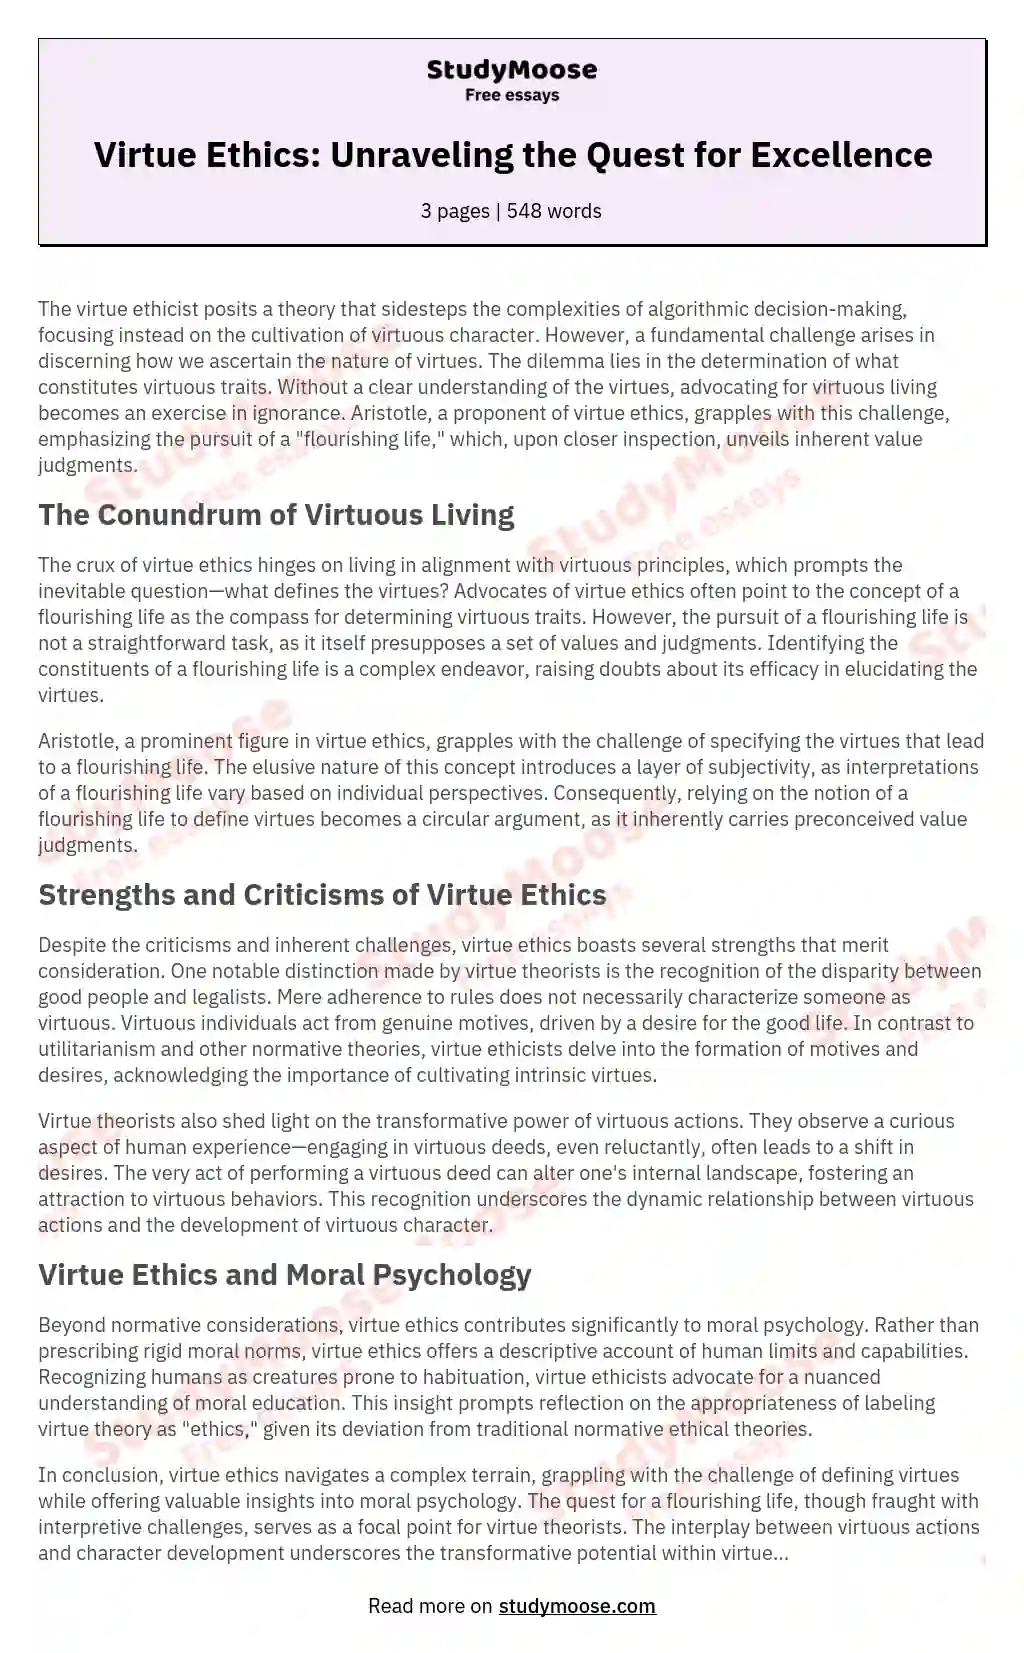 The Strengths and Weaknesses of Virtue Ethics